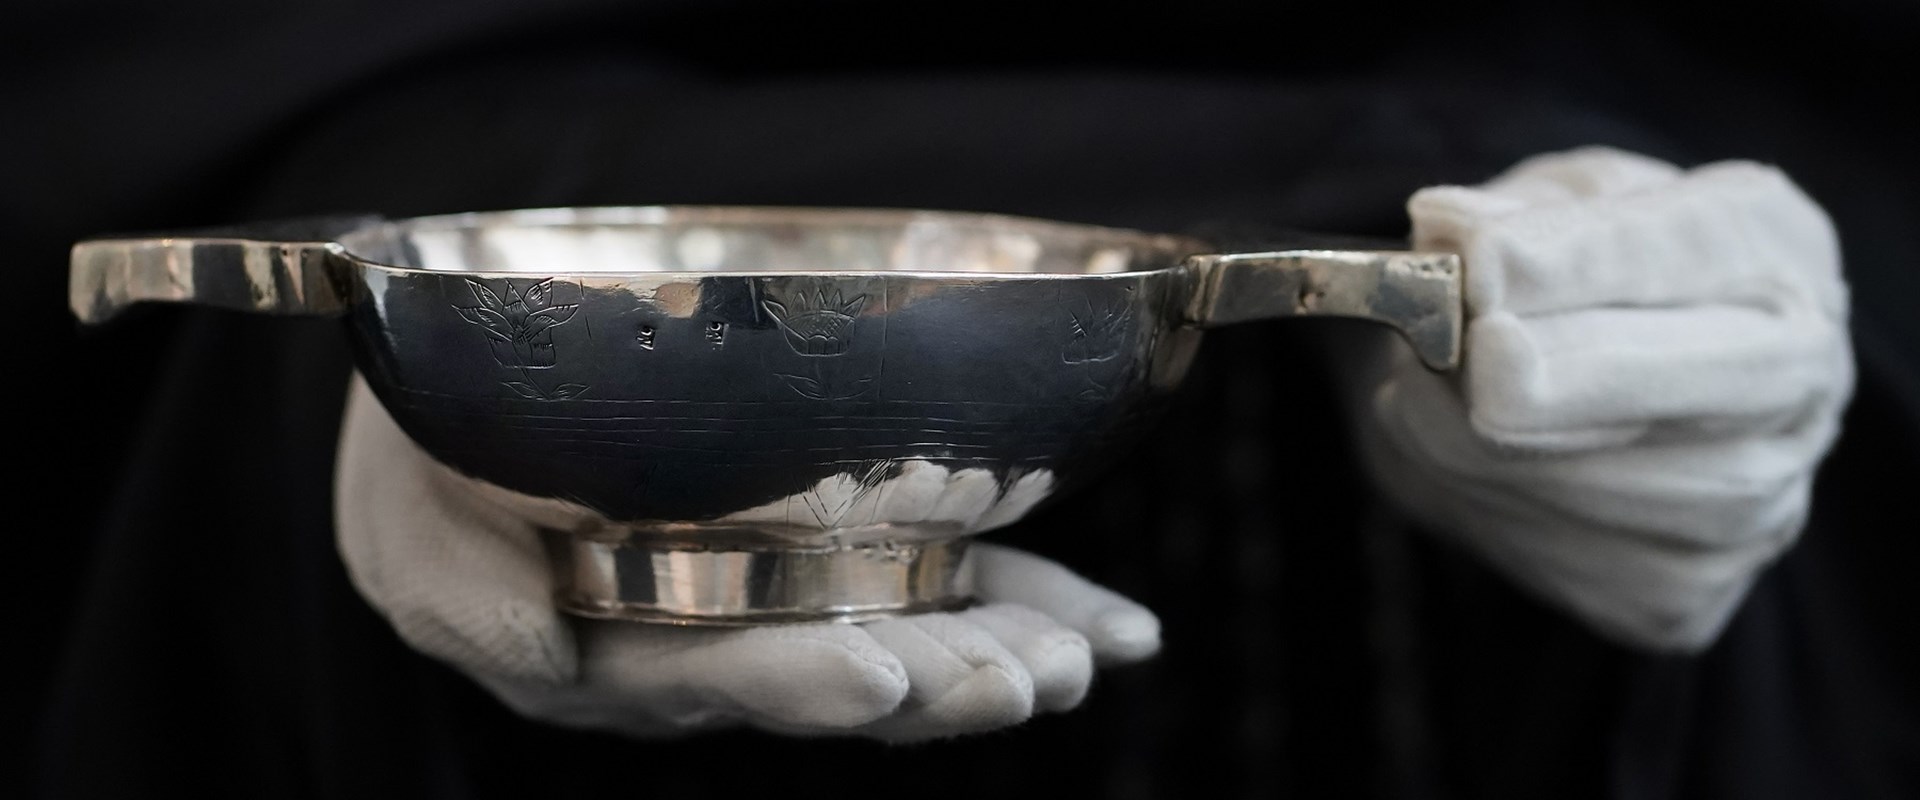 A shiny silver quaich being held delicately by two white-gloved hands against a black background.